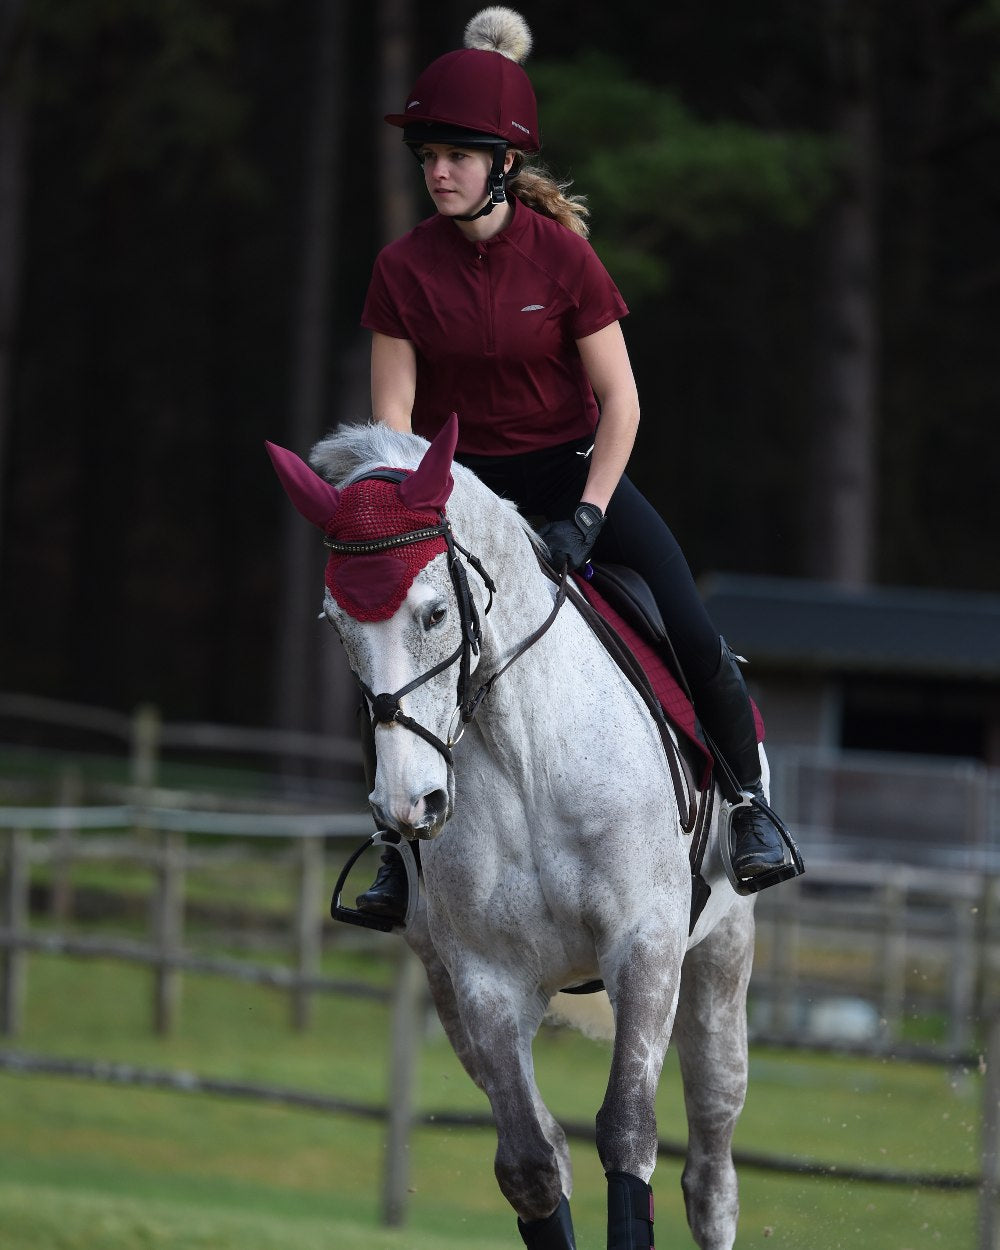 Maroon Coloured WeatherBeeta Prime Short Sleeve Top On A Arena Background 